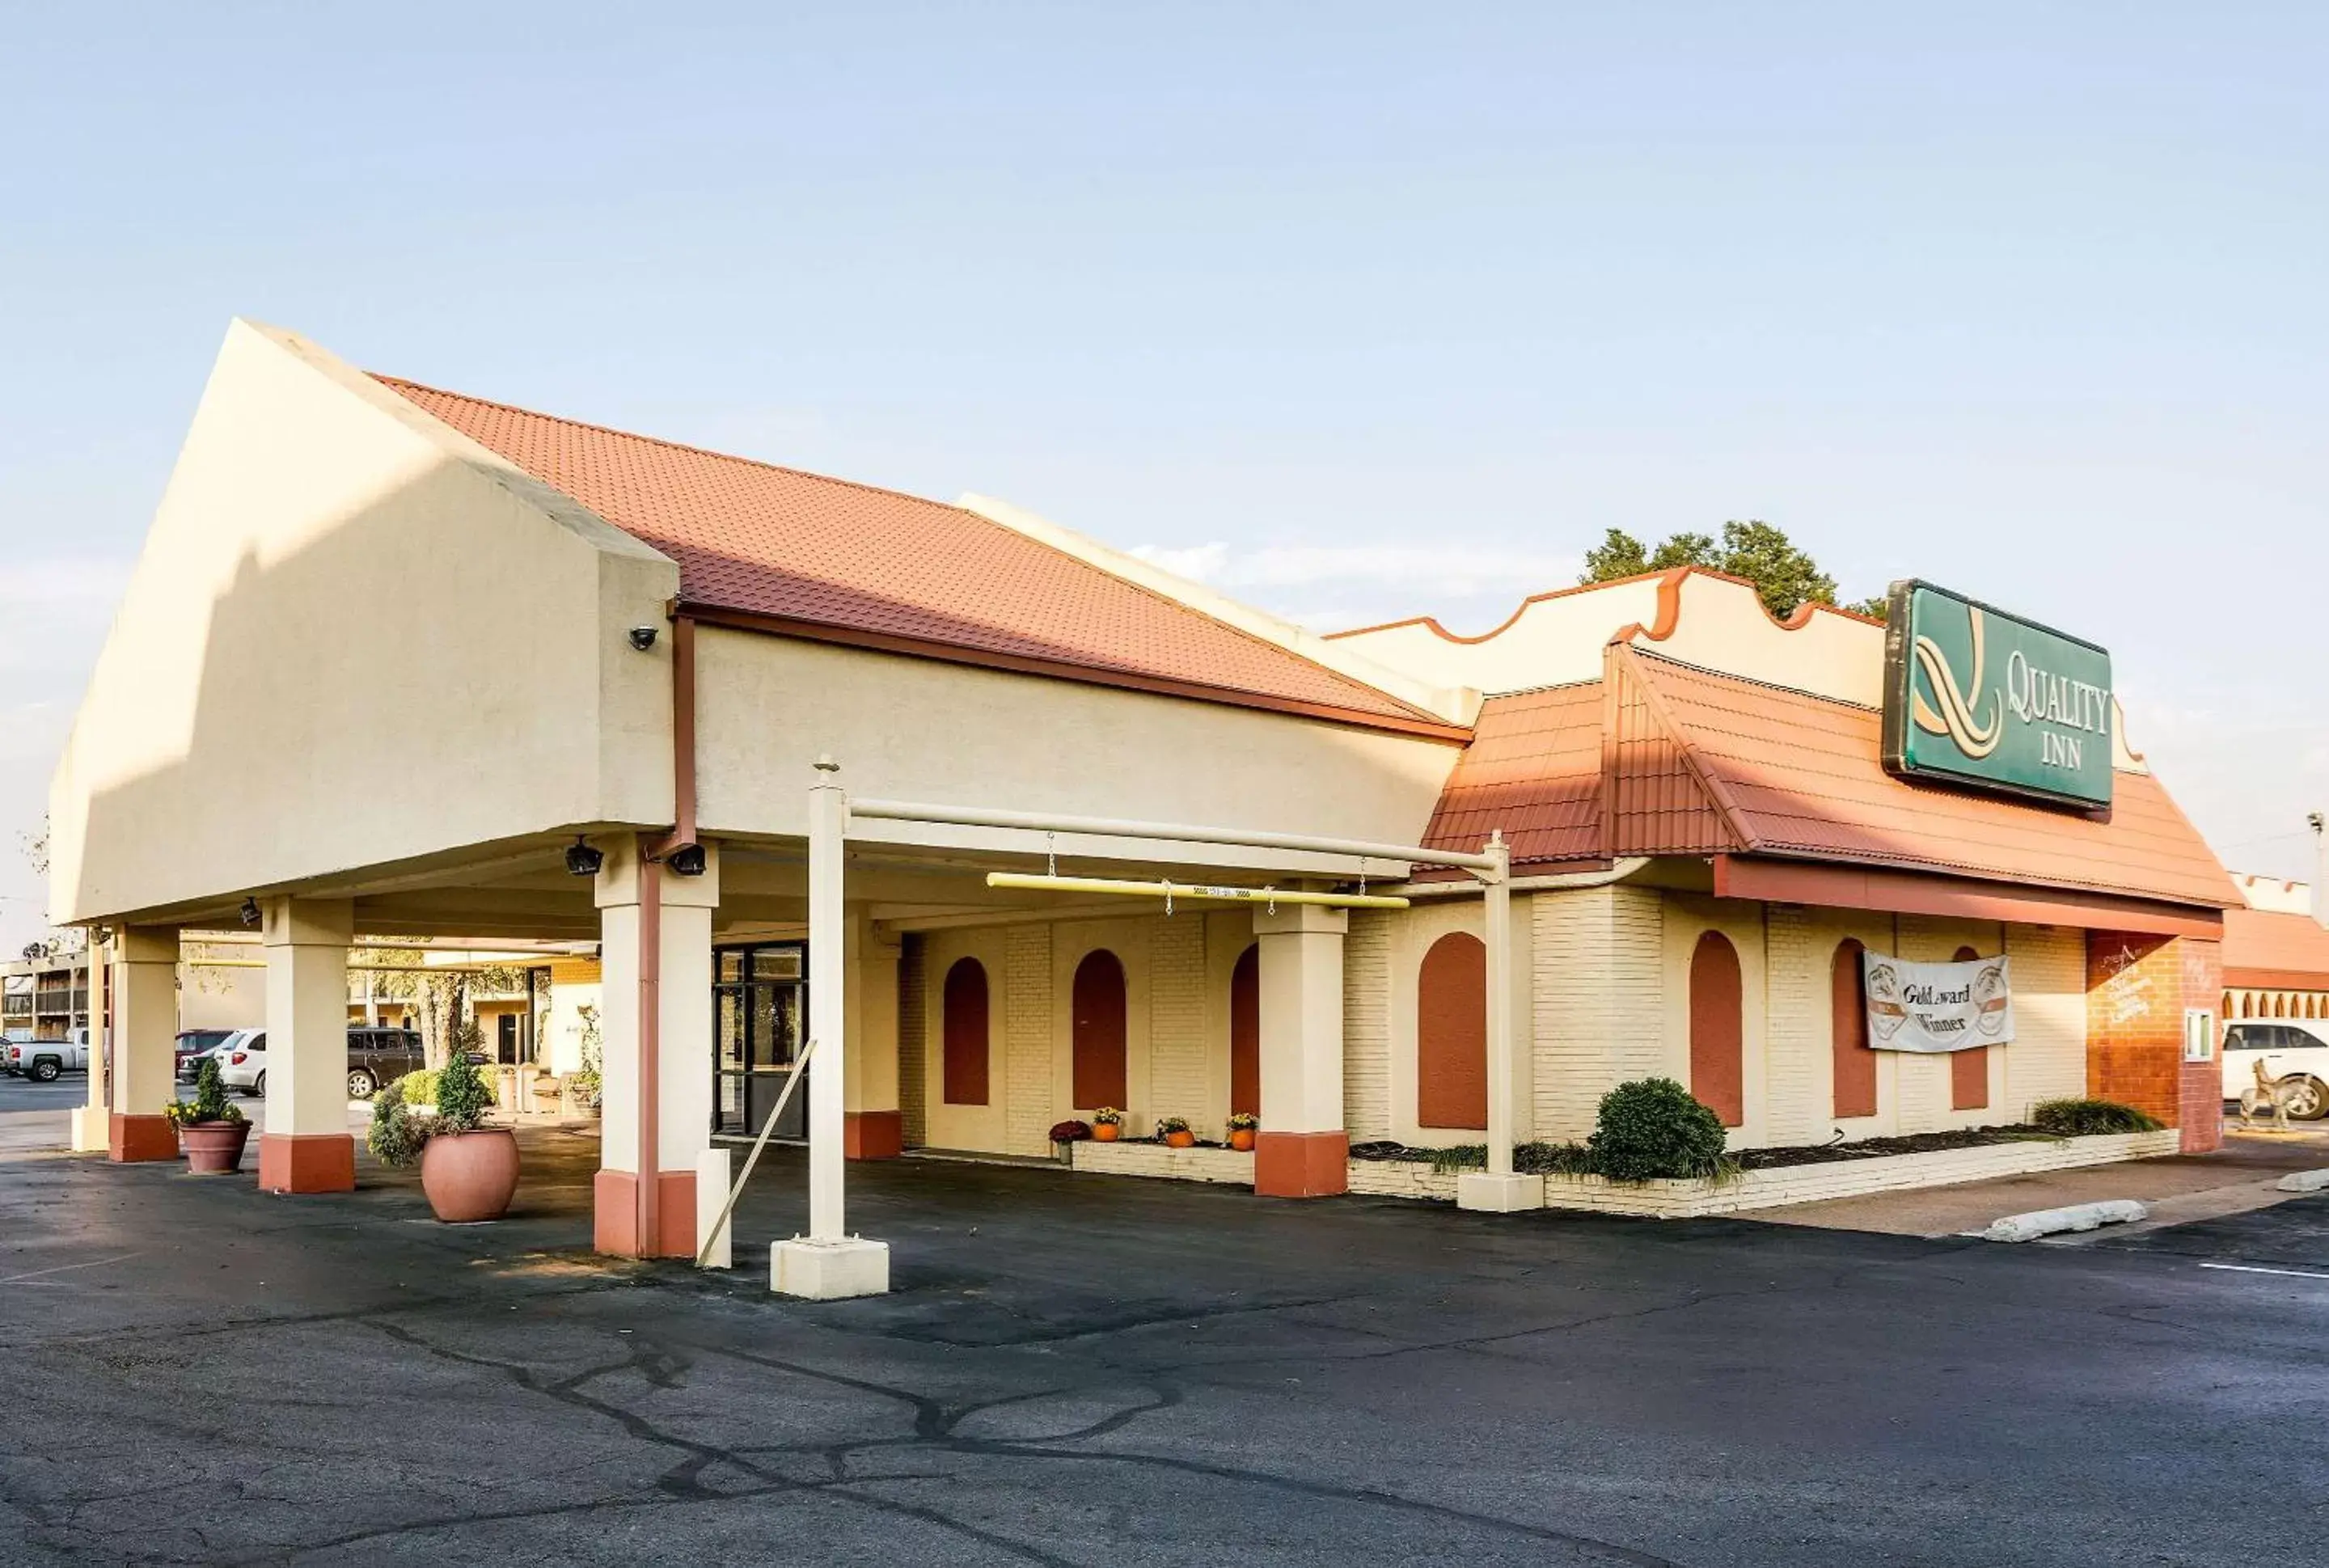 Property Building in Quality Inn Blytheville I-55